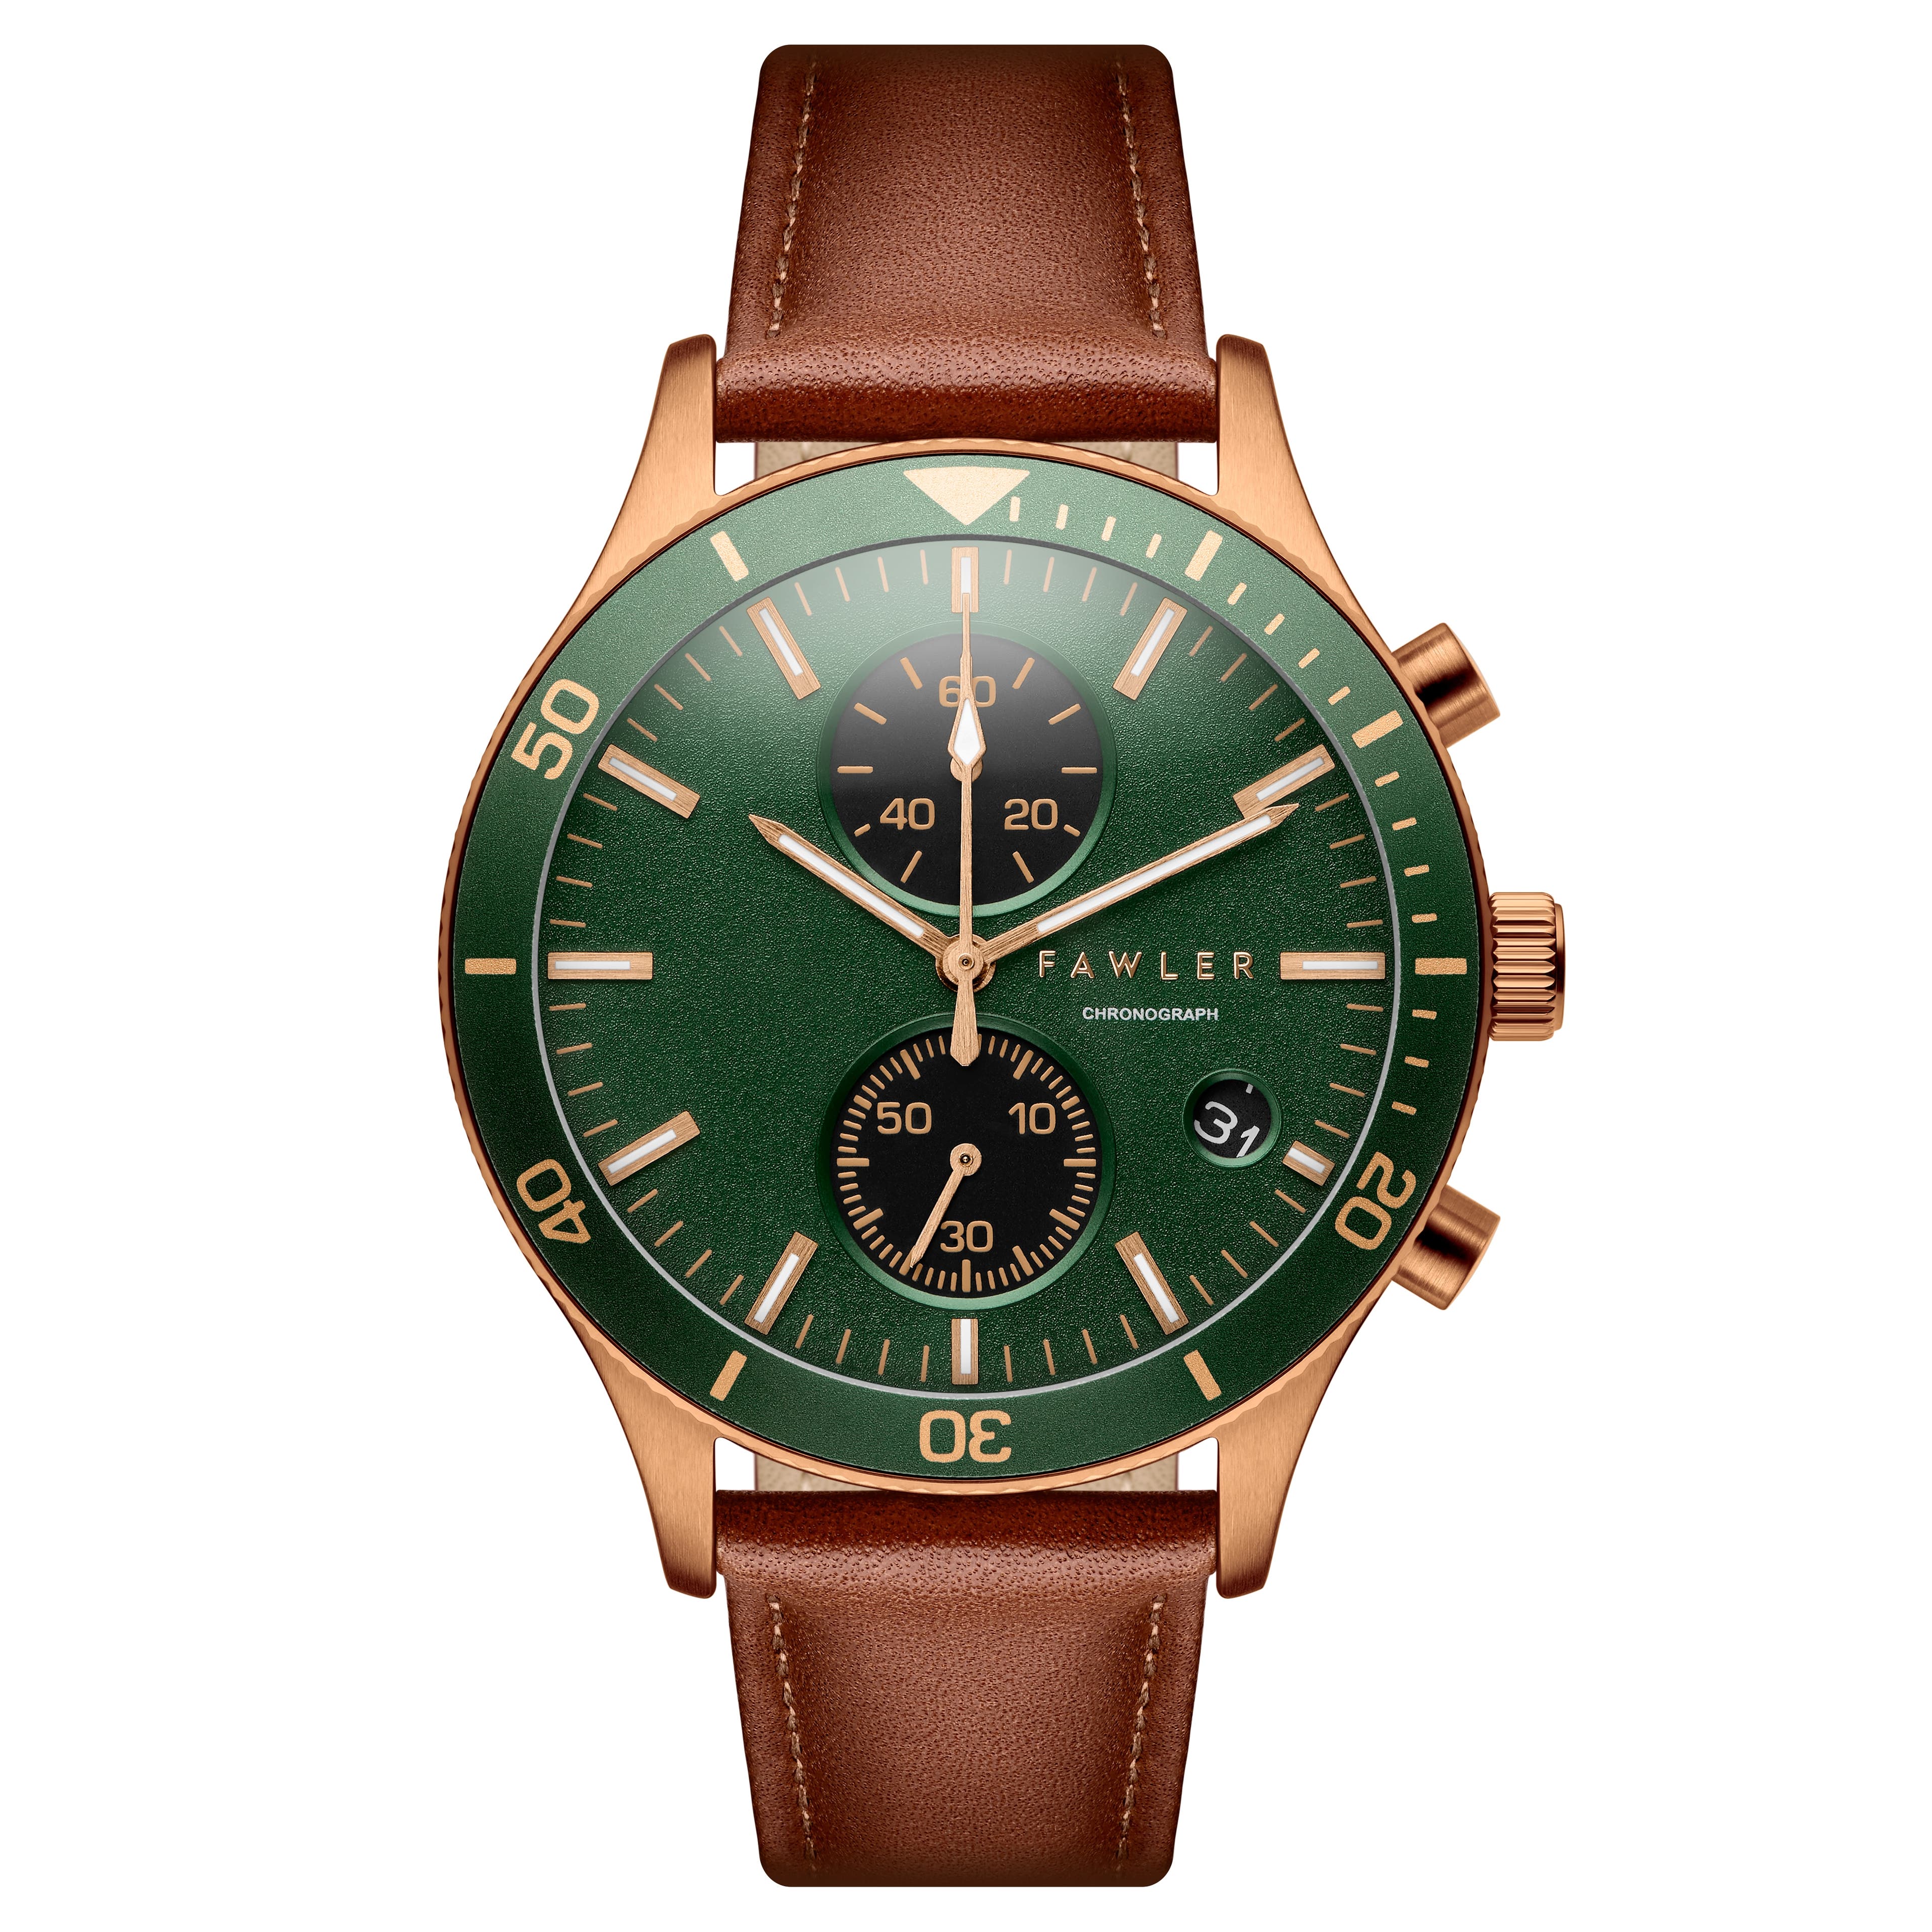 Aeris | Brown Brass Chronograph Watch with Green Dial